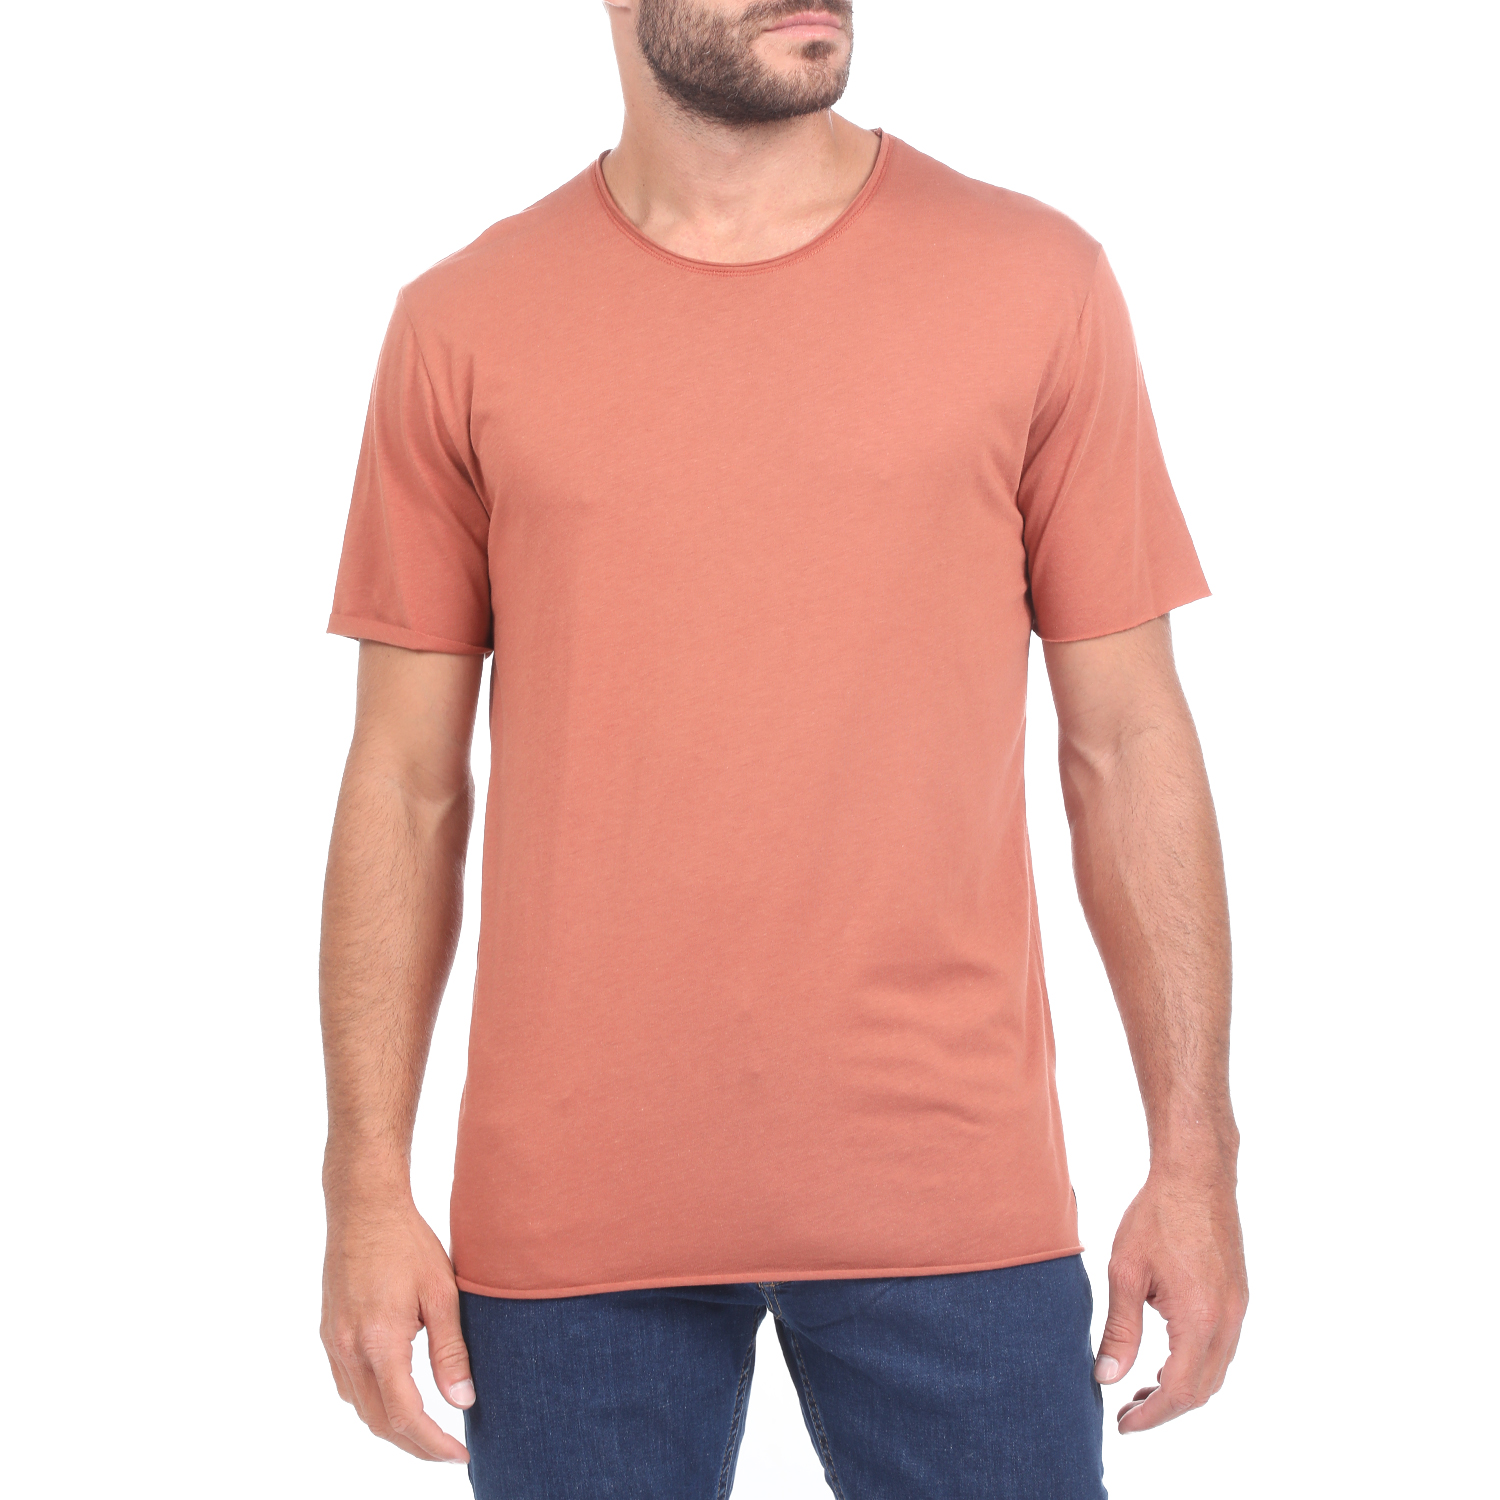 DIRTY LAUNDRY Ανδρικό t-shirt DIRTY LAUNDRY ESSENTIAL MODAL κεραμιδί